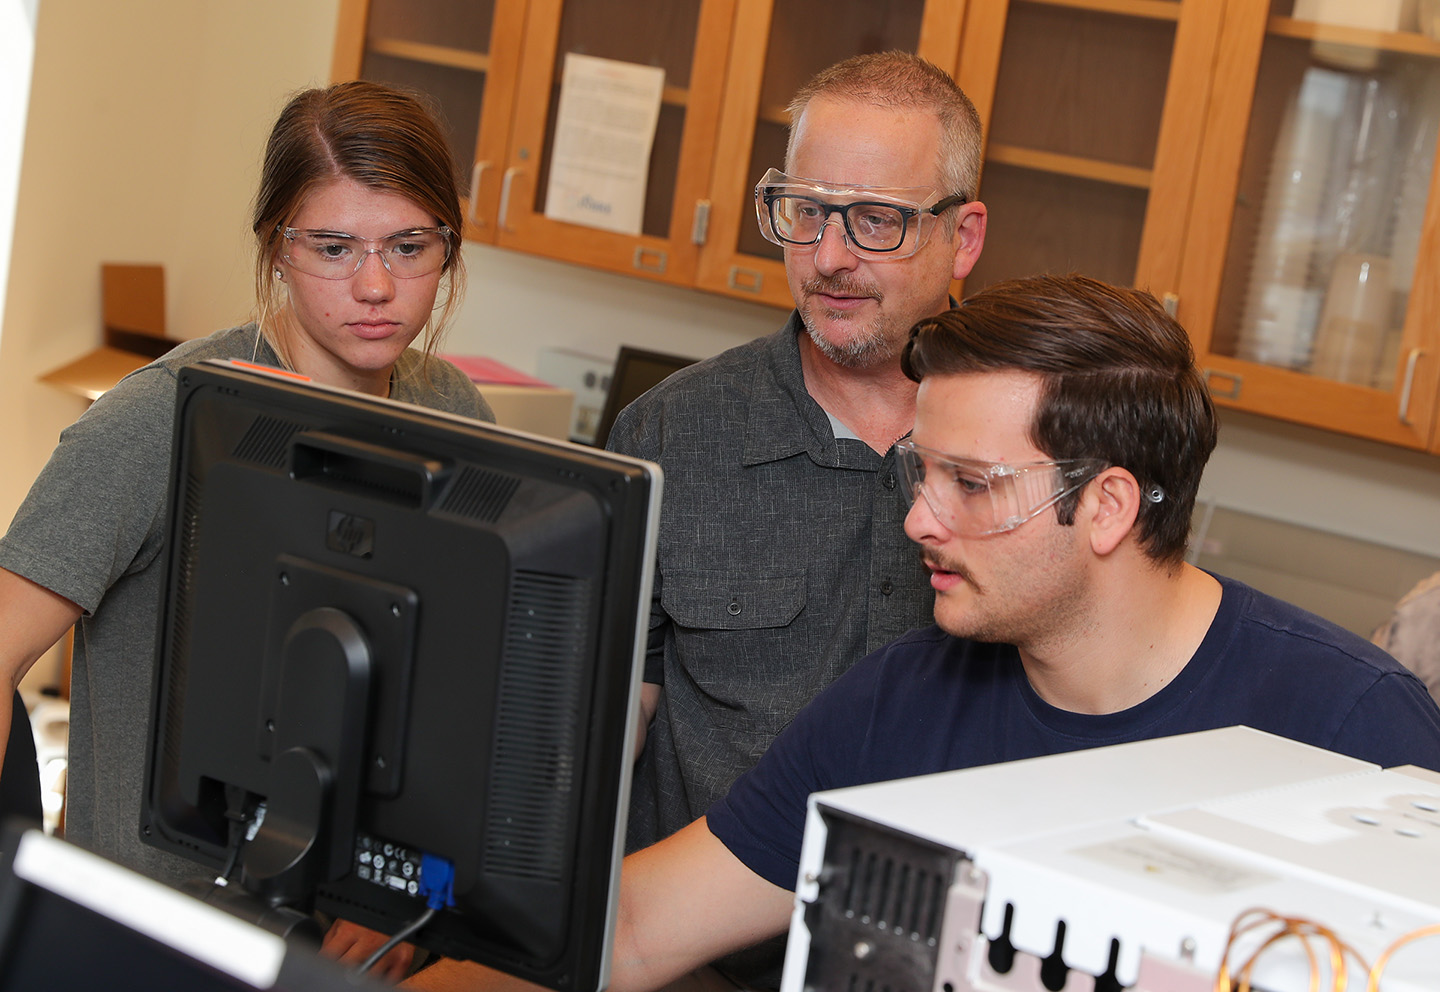 UNK undergraduate students will work with chemistry professor Chris Exstrom on a research project addressing the concrete industry’s environmental impact.